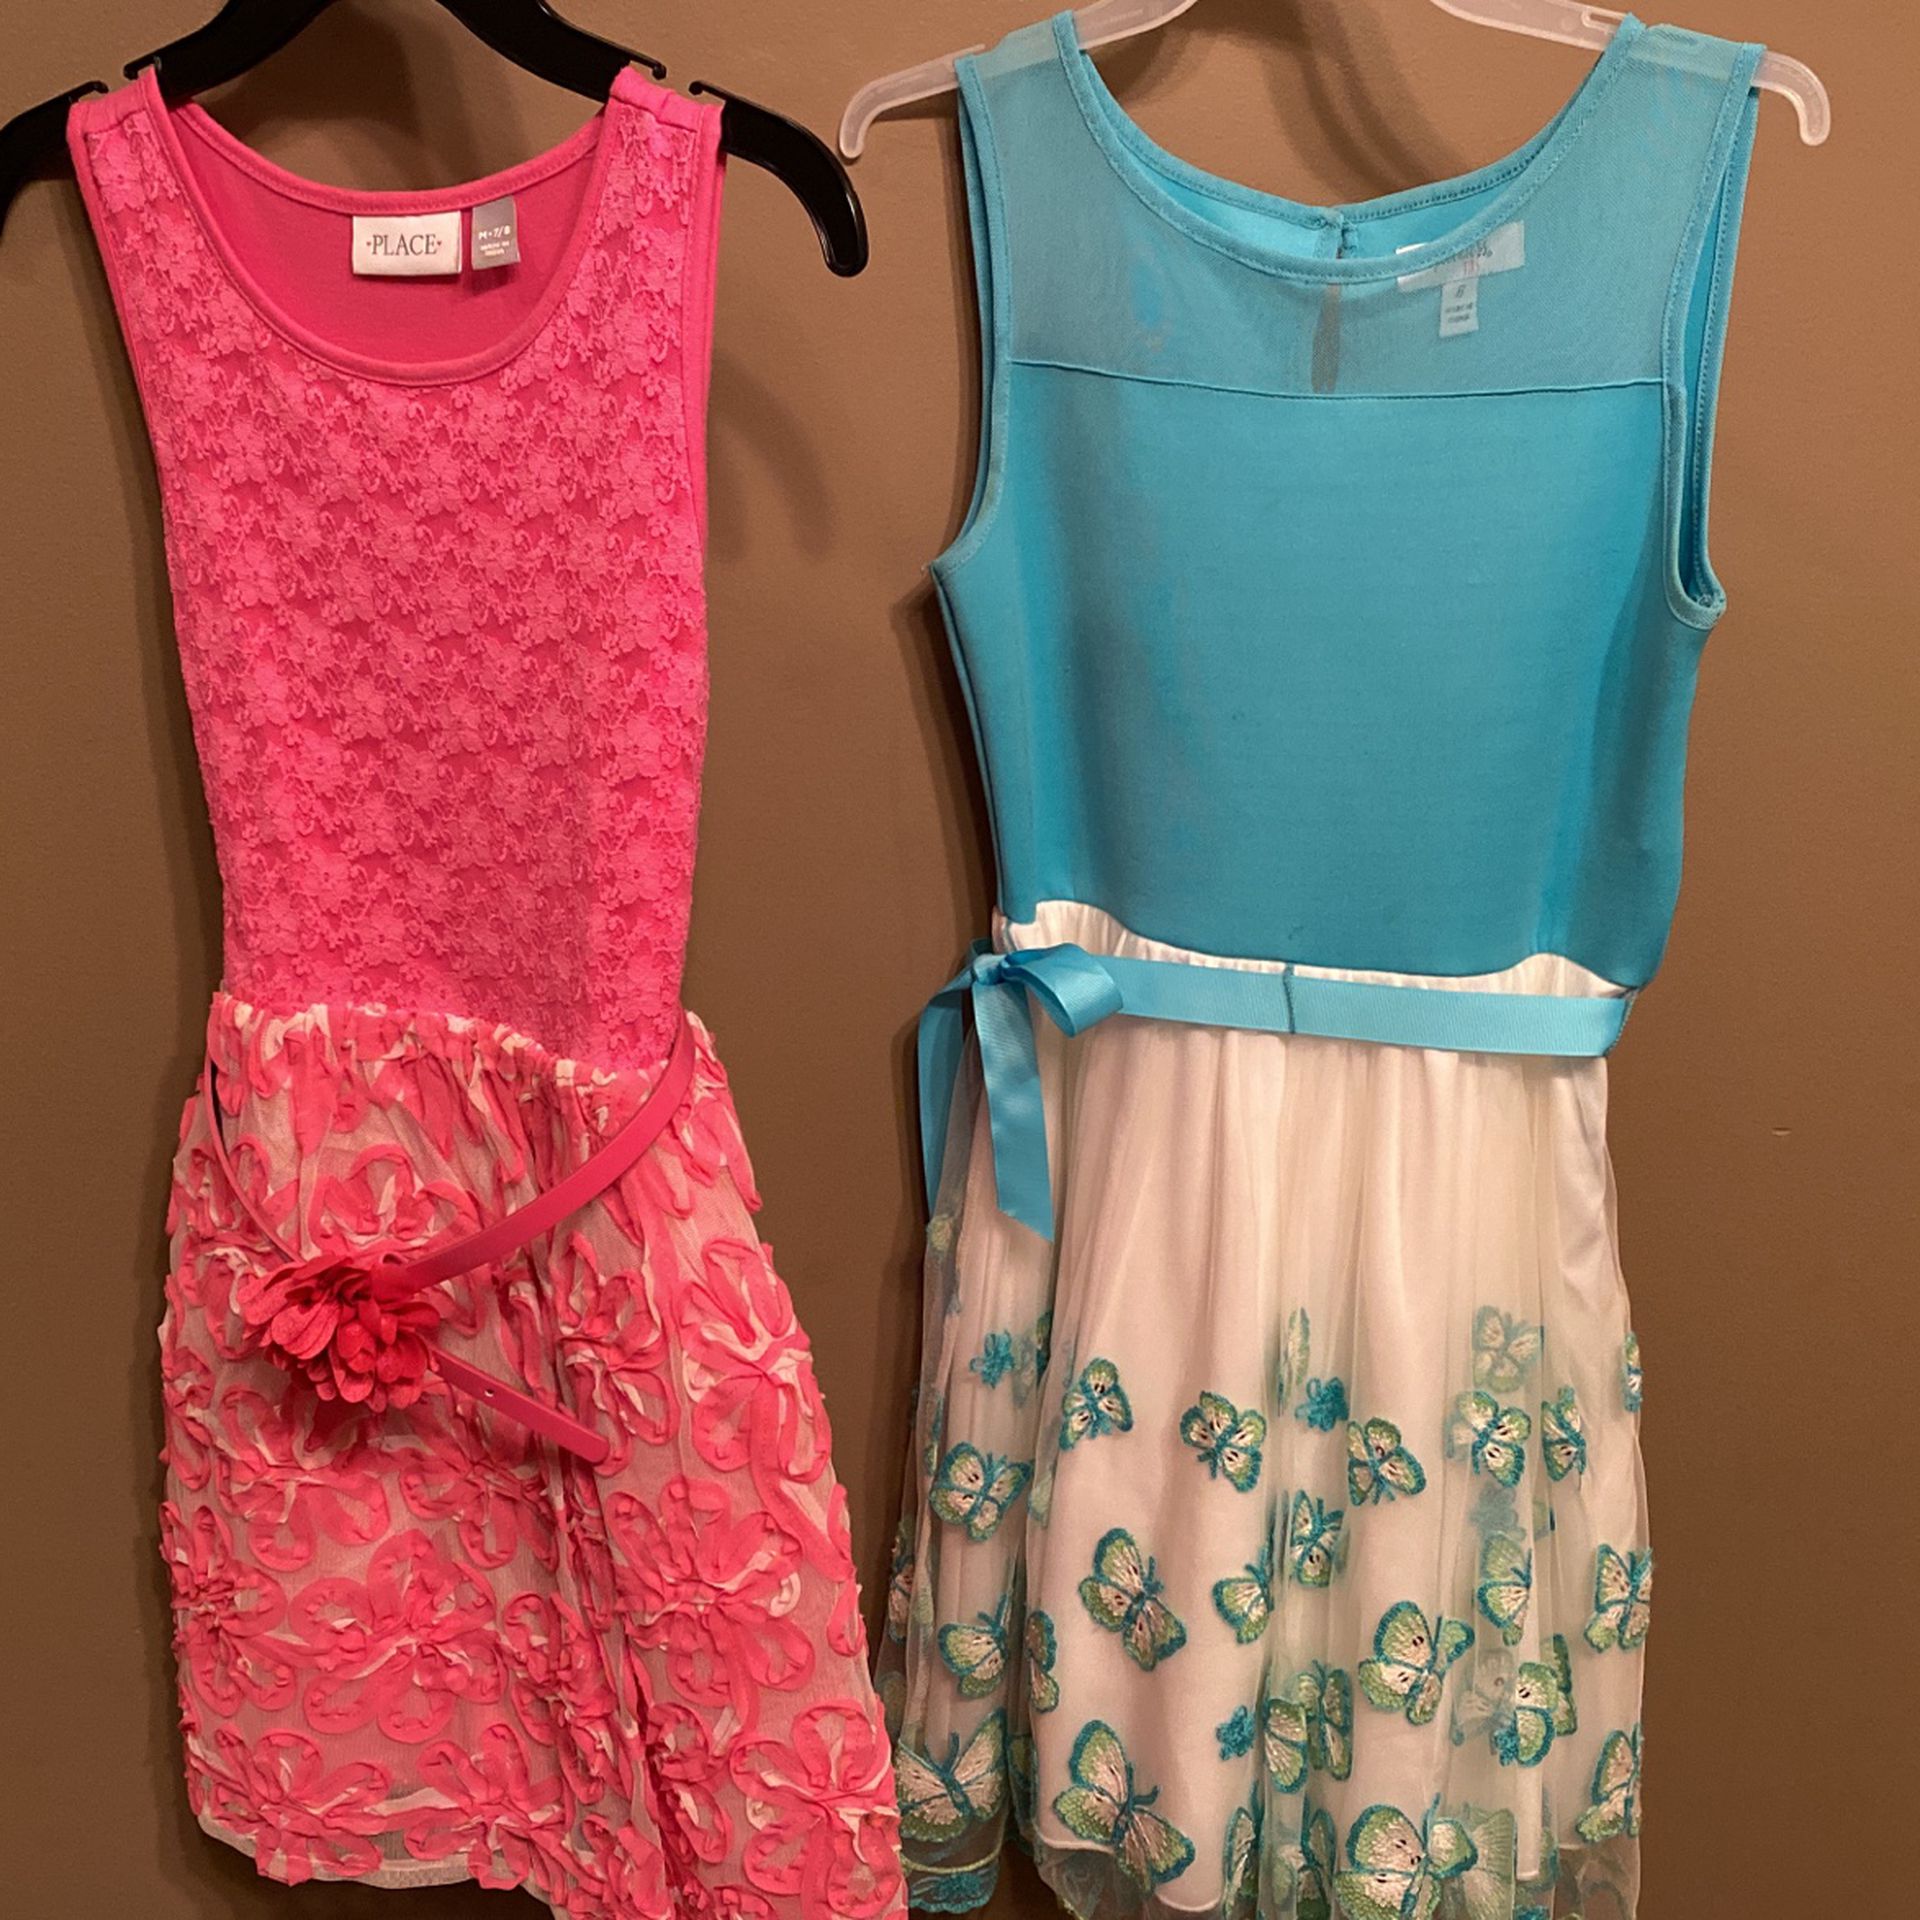 Girl’s Dresses, Pink and Green, Sizes 7-8, $15 ea